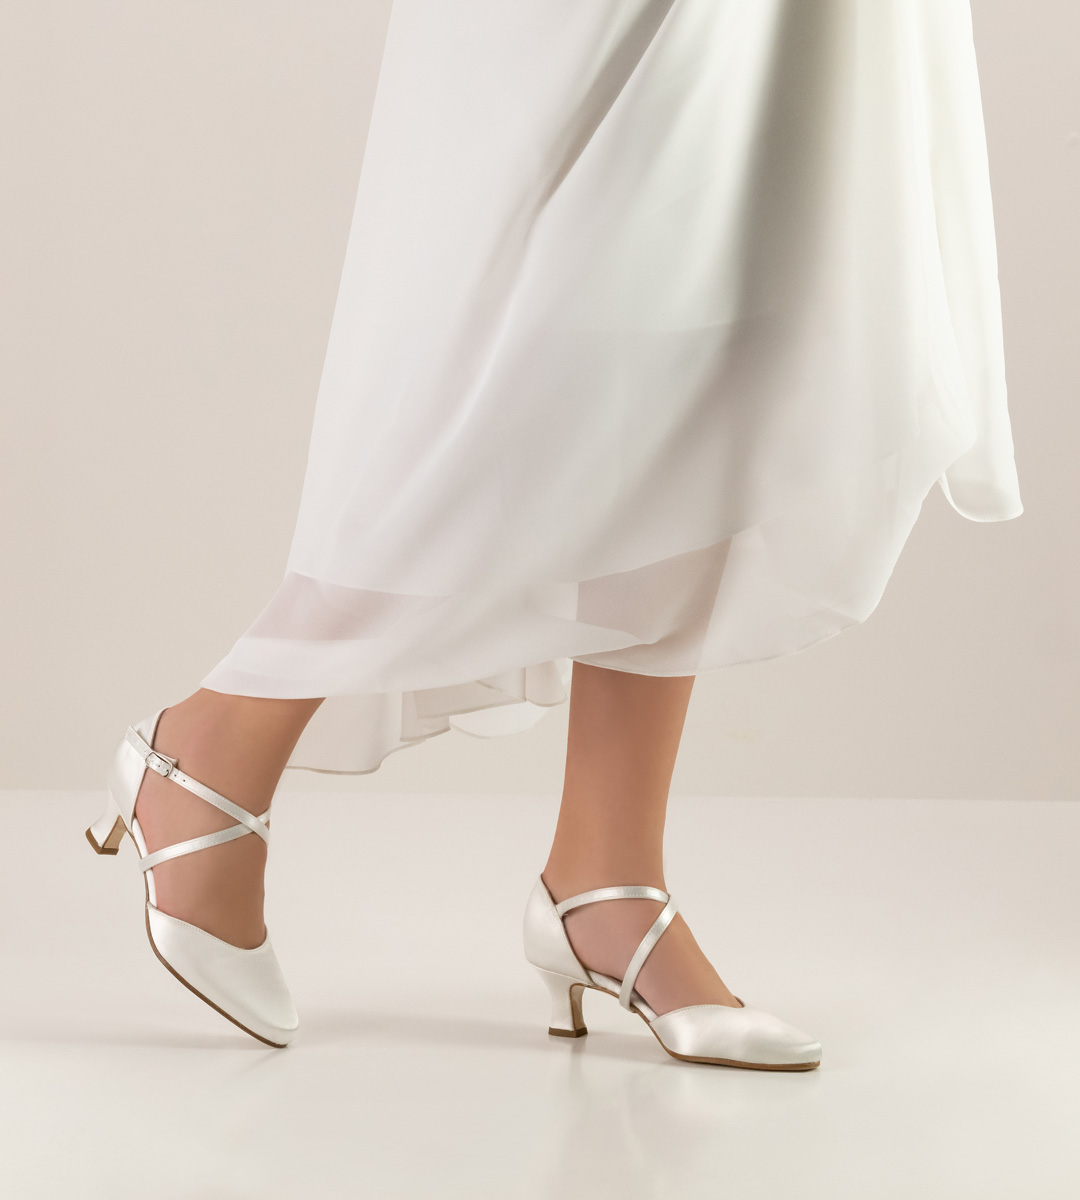 5.5 cm high bridal shoe with leather sole by Werner Kern in combination with white wedding dress